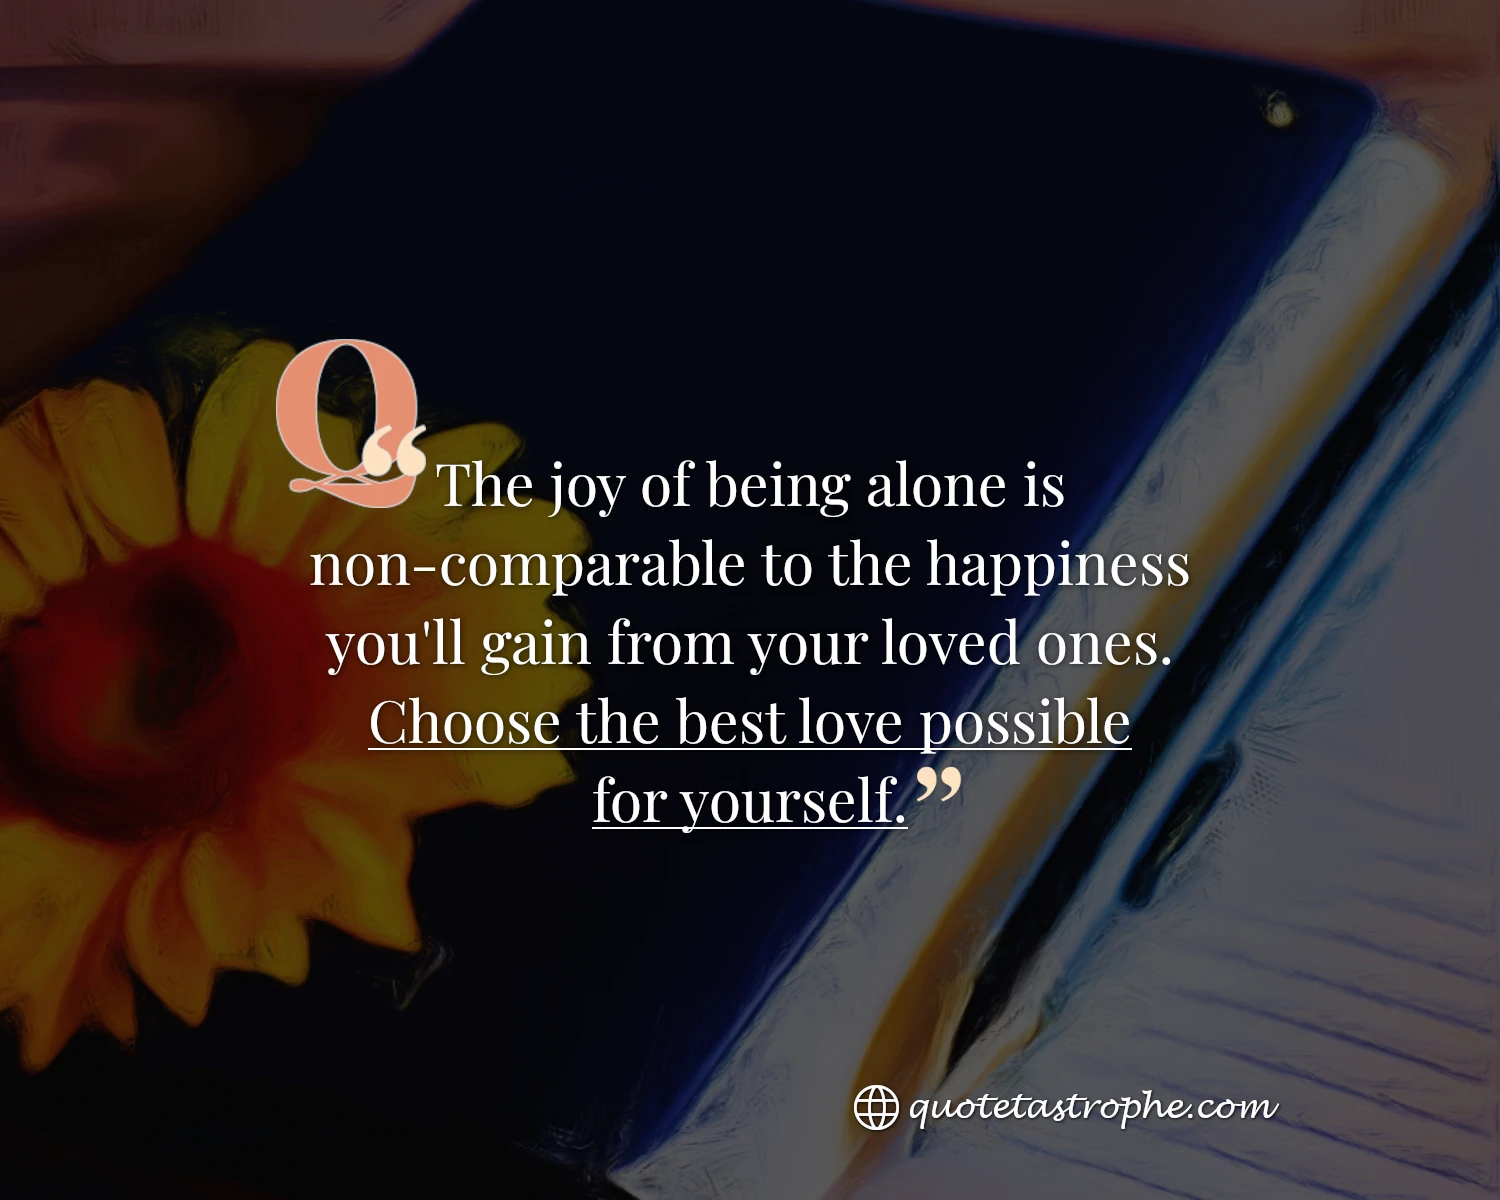 The Joy of Being Alone is Non-comparable, Choose The Best Love